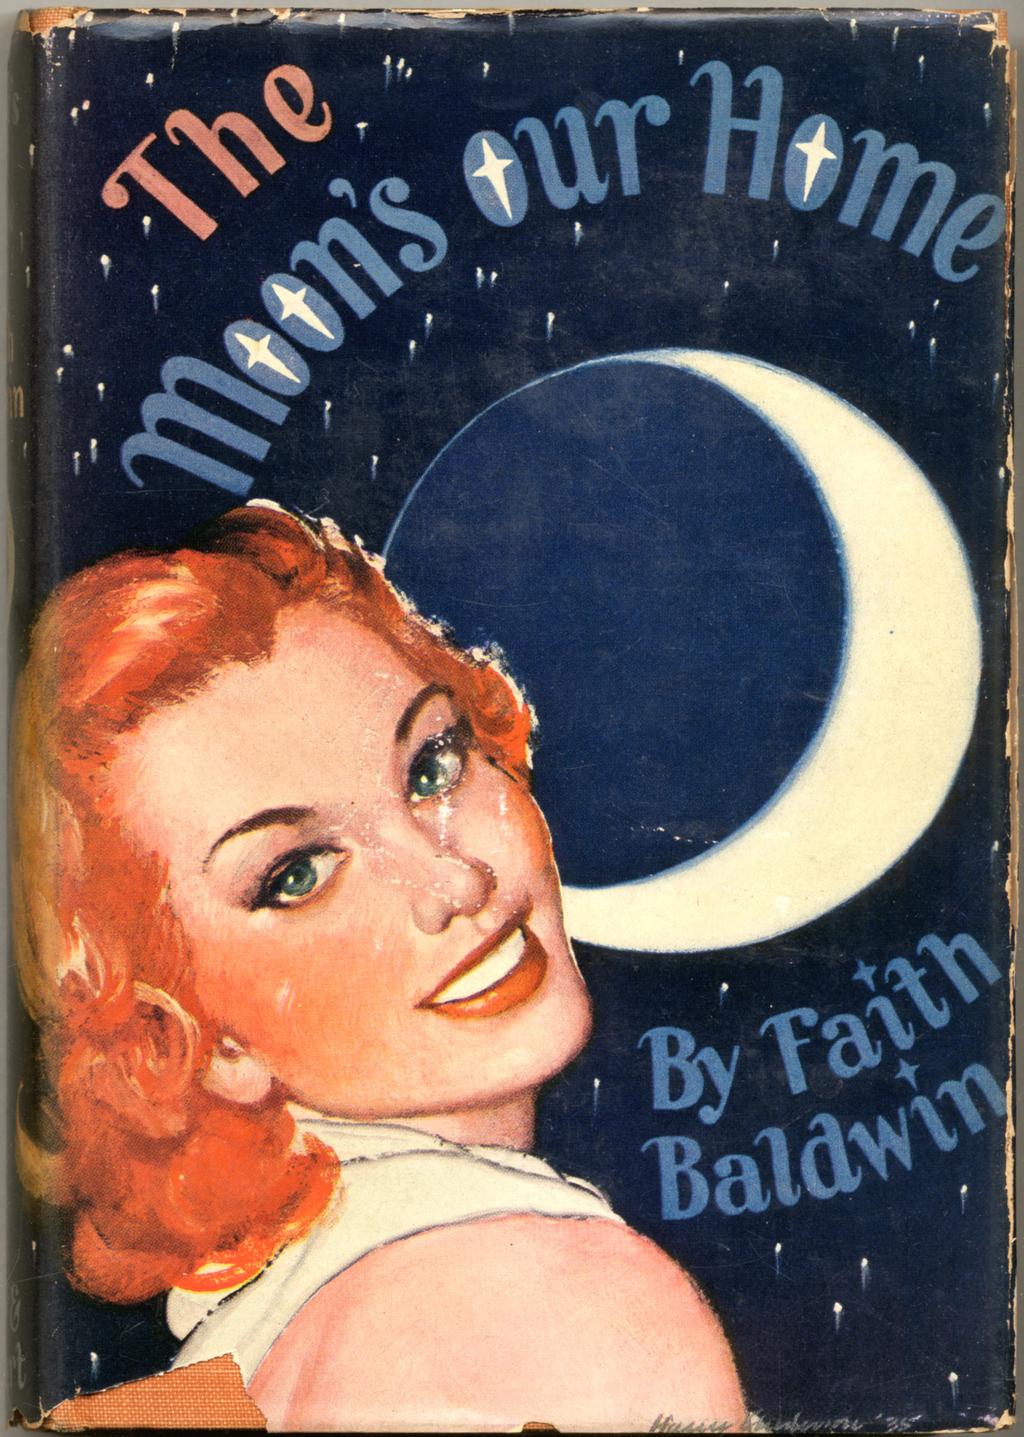 The Moon s Our Home New York: Farrar & Rinehart (1936) $450 First edition. Review copy with inserted review slip.